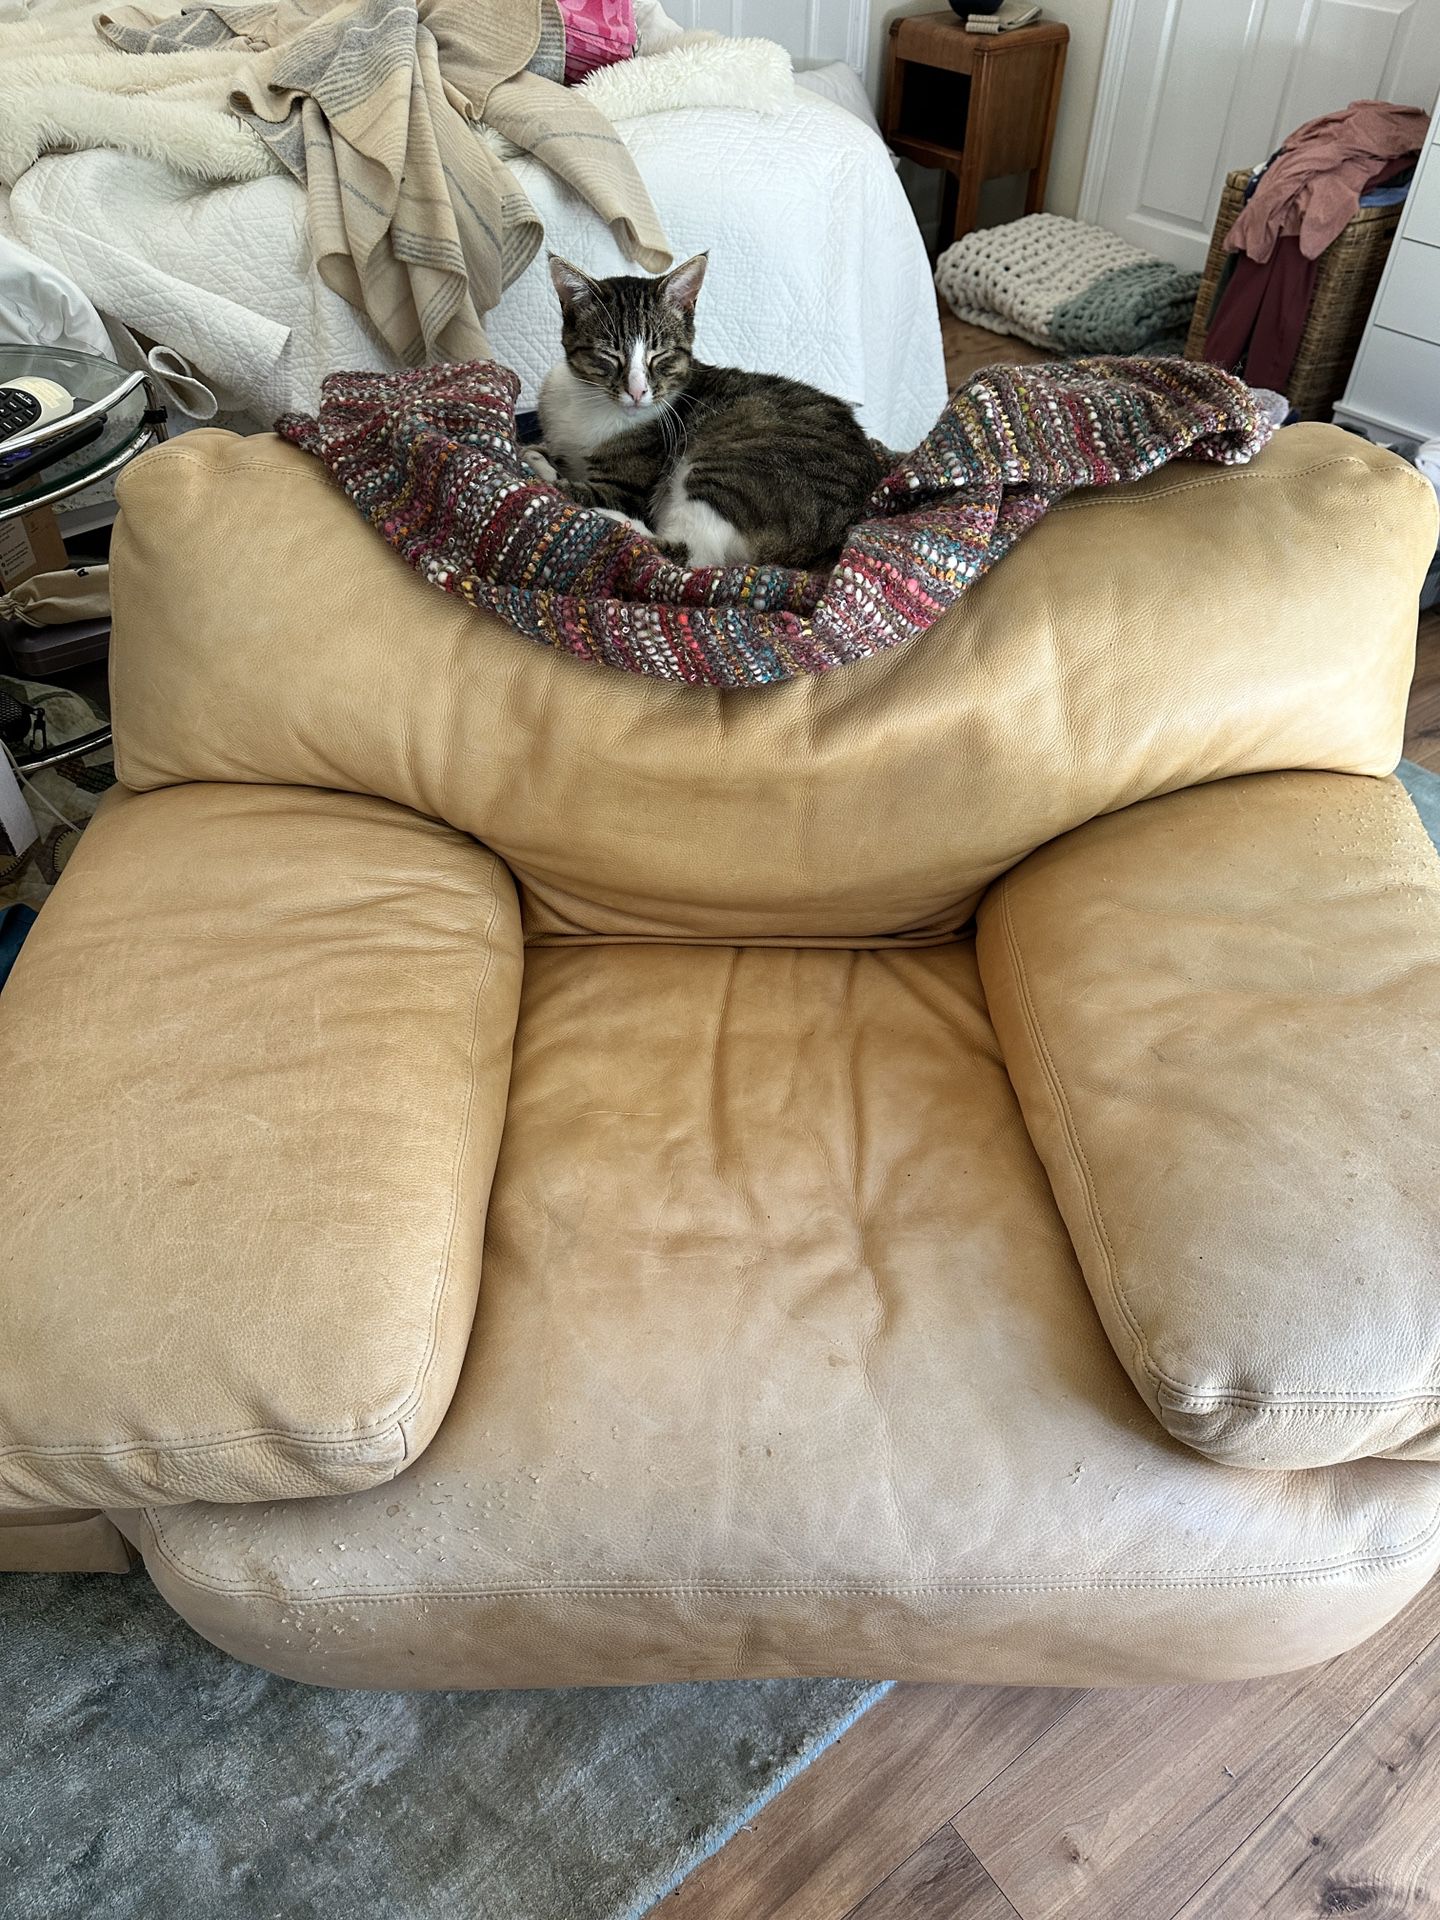 Oversized Tan Leather Chair & Ottoman